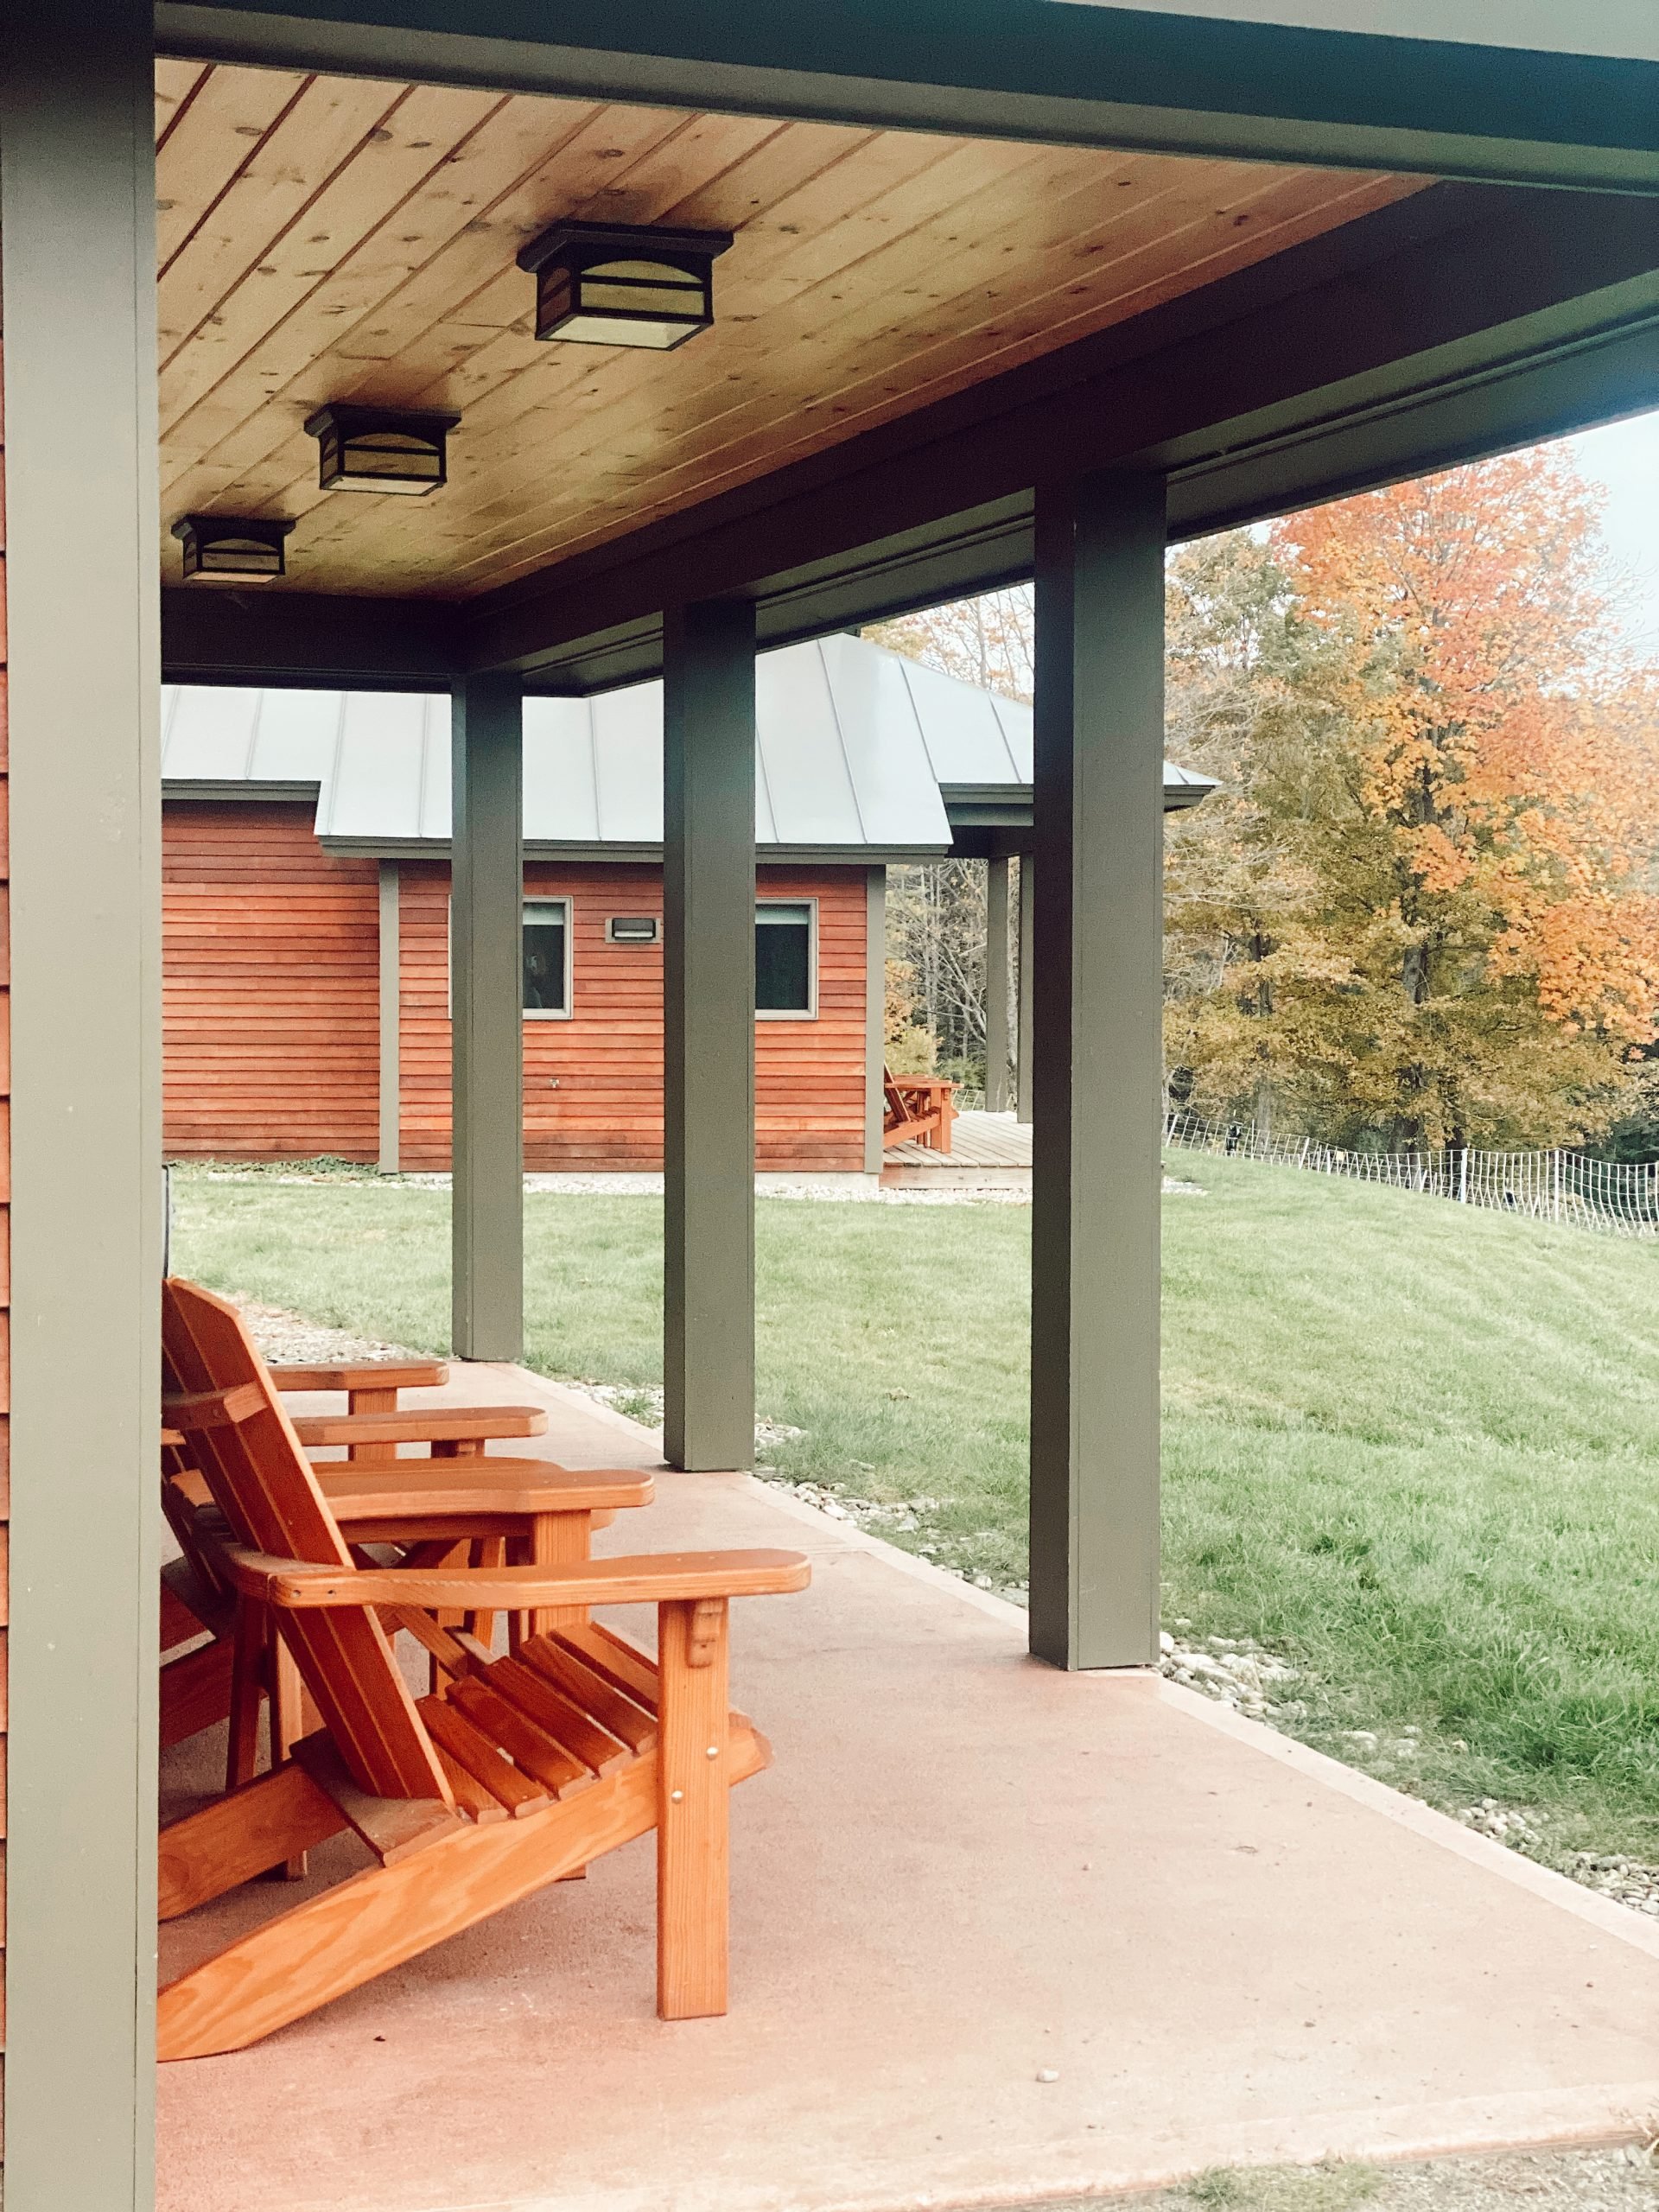 two wooden chairs sit on a cabin porch